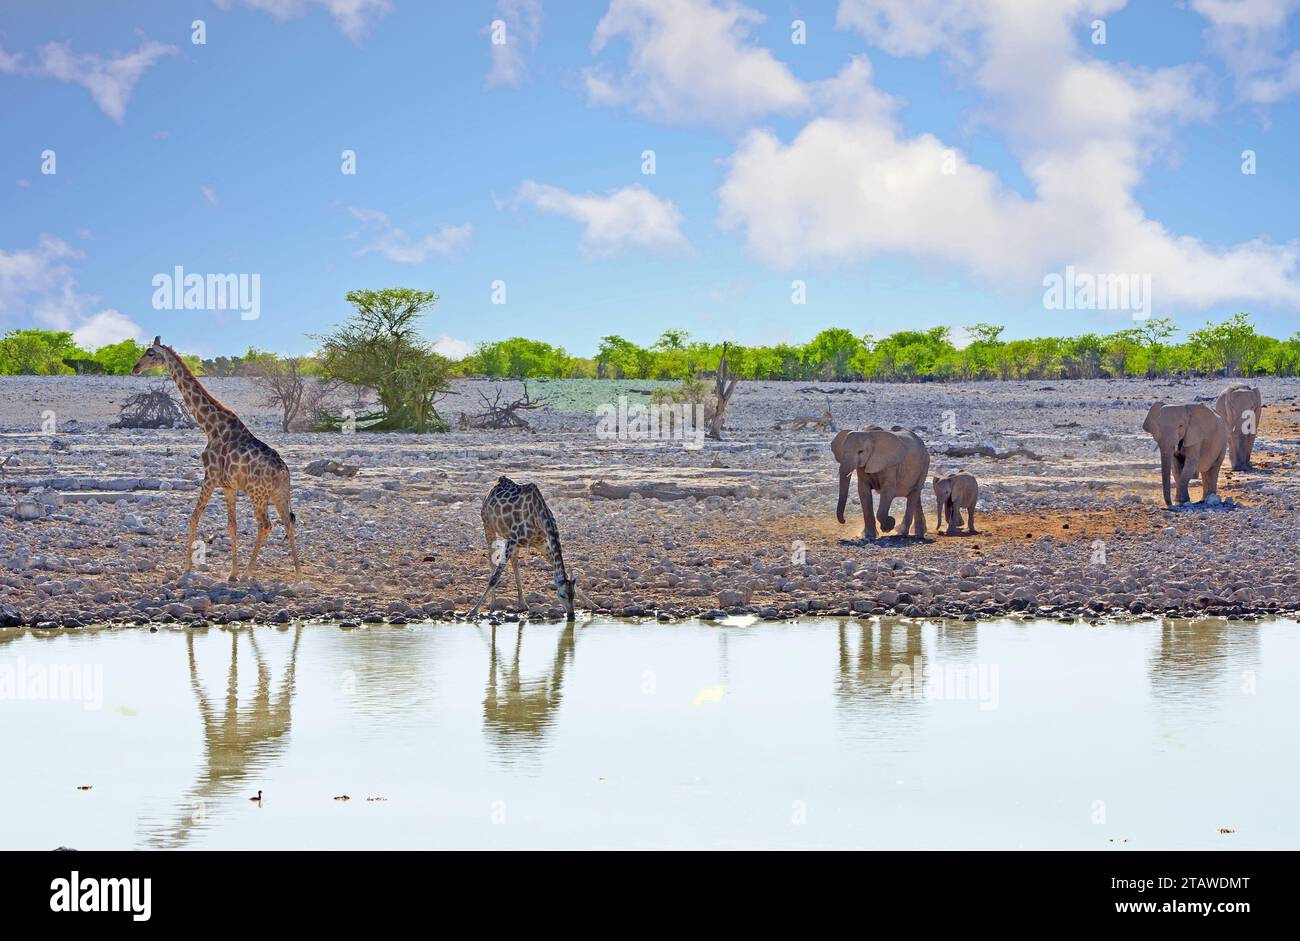 Herd of elephants coming to take a drink at a waterhole while two giraffe are already there. Stock Photo